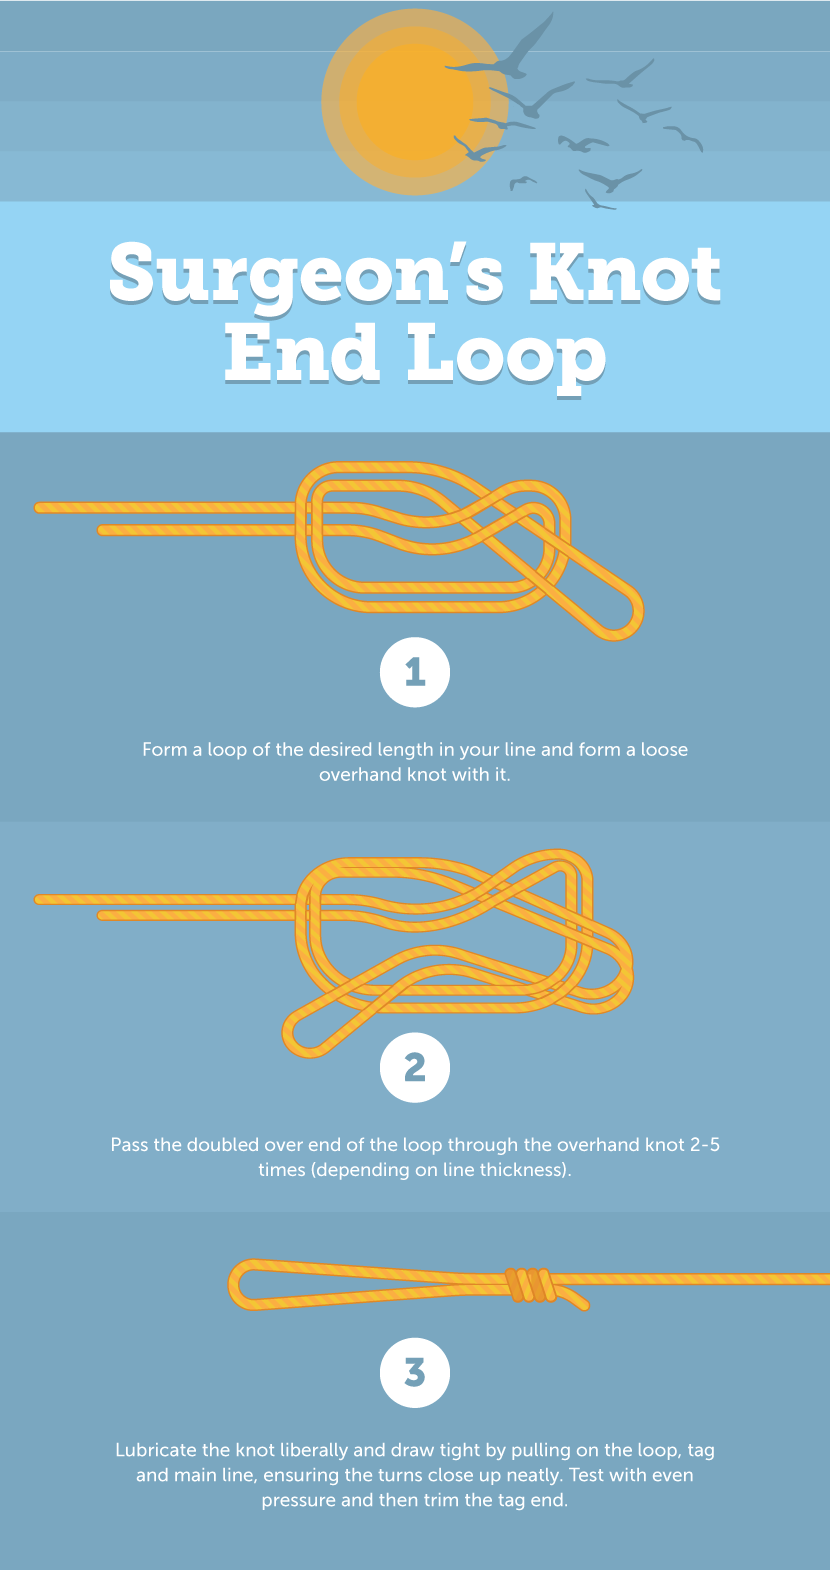 The Anatomy of a Fishing Knot